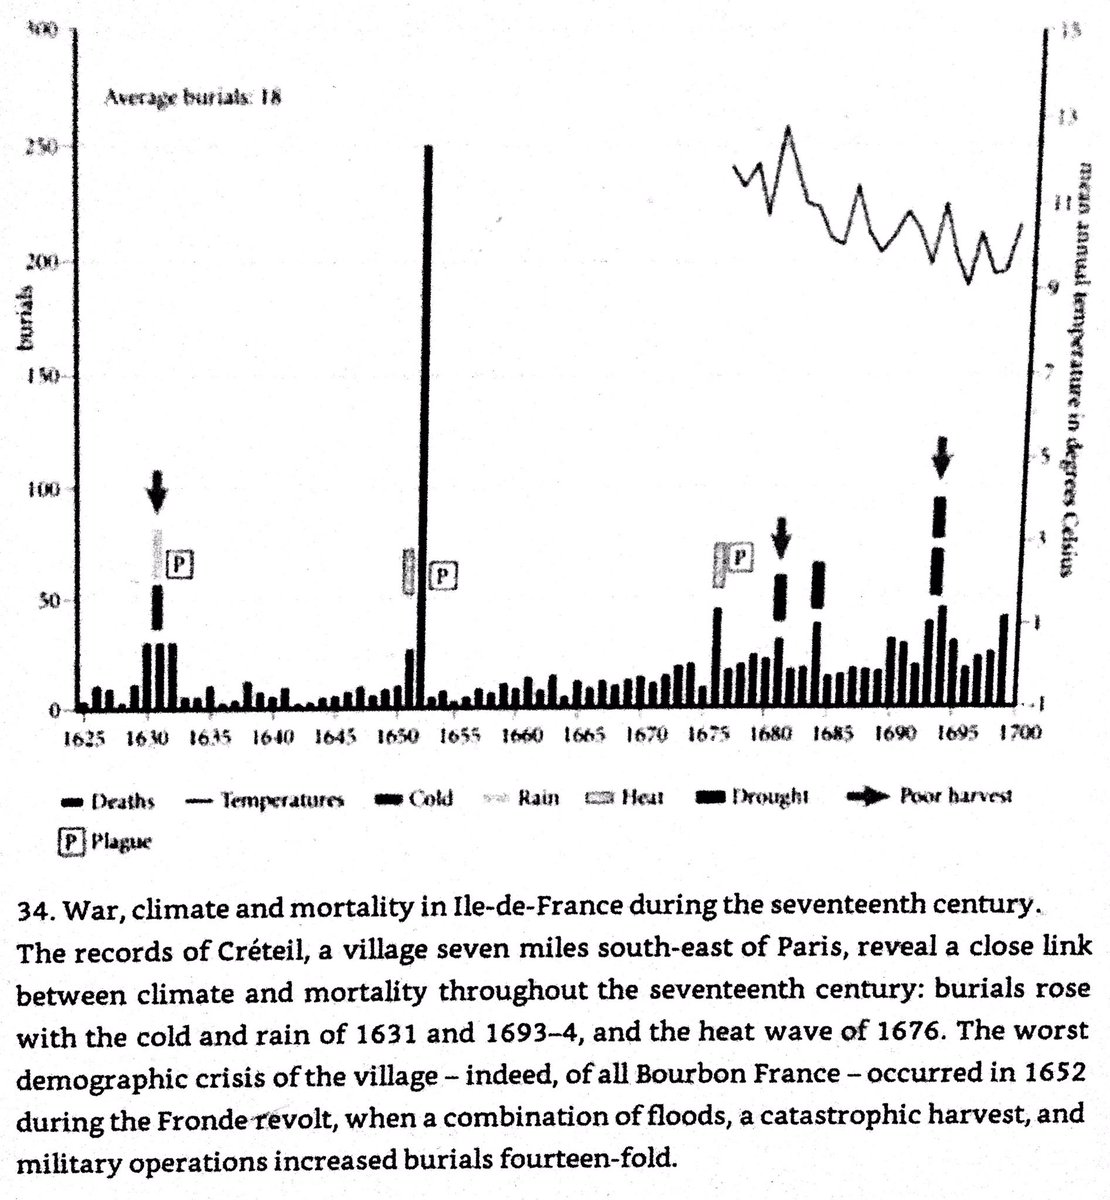 14x spike in deaths in Paris during the Fronde of 1652. Fighting, famine, & flooding did much of the killing.